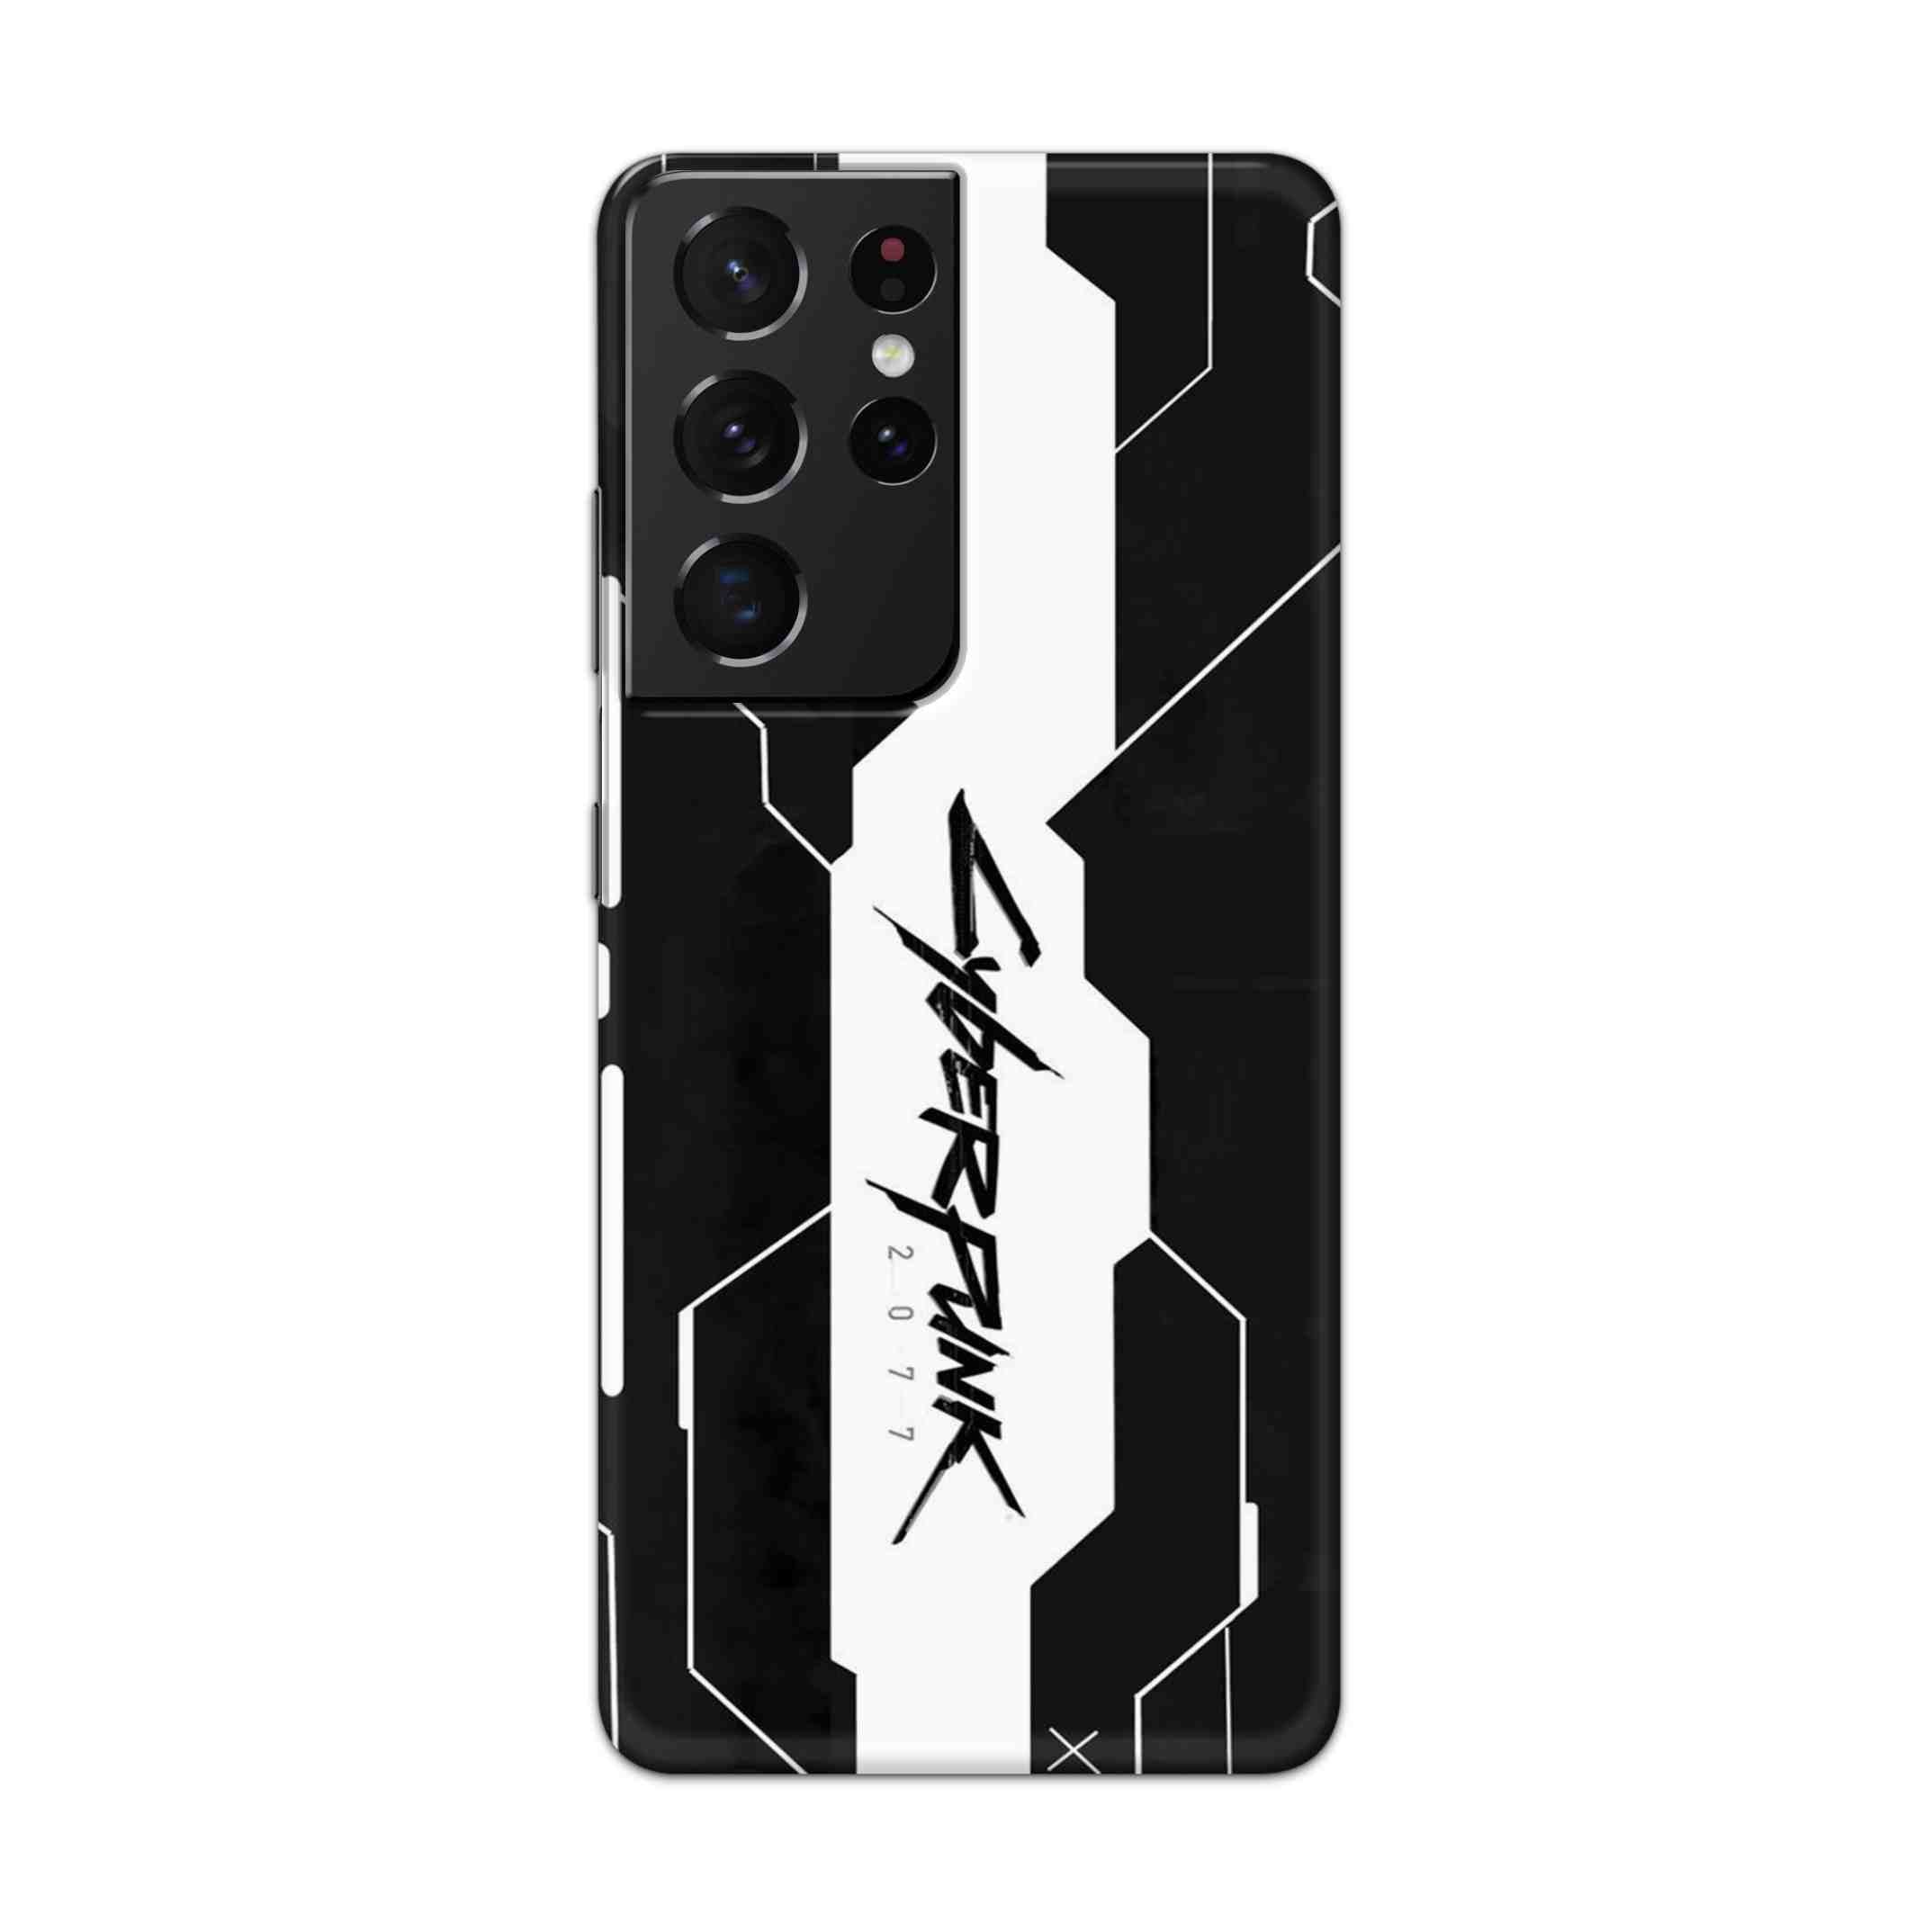 Buy Cyberpunk 2077 Art Hard Back Mobile Phone Case Cover For Samsung Galaxy S21 Ultra Online